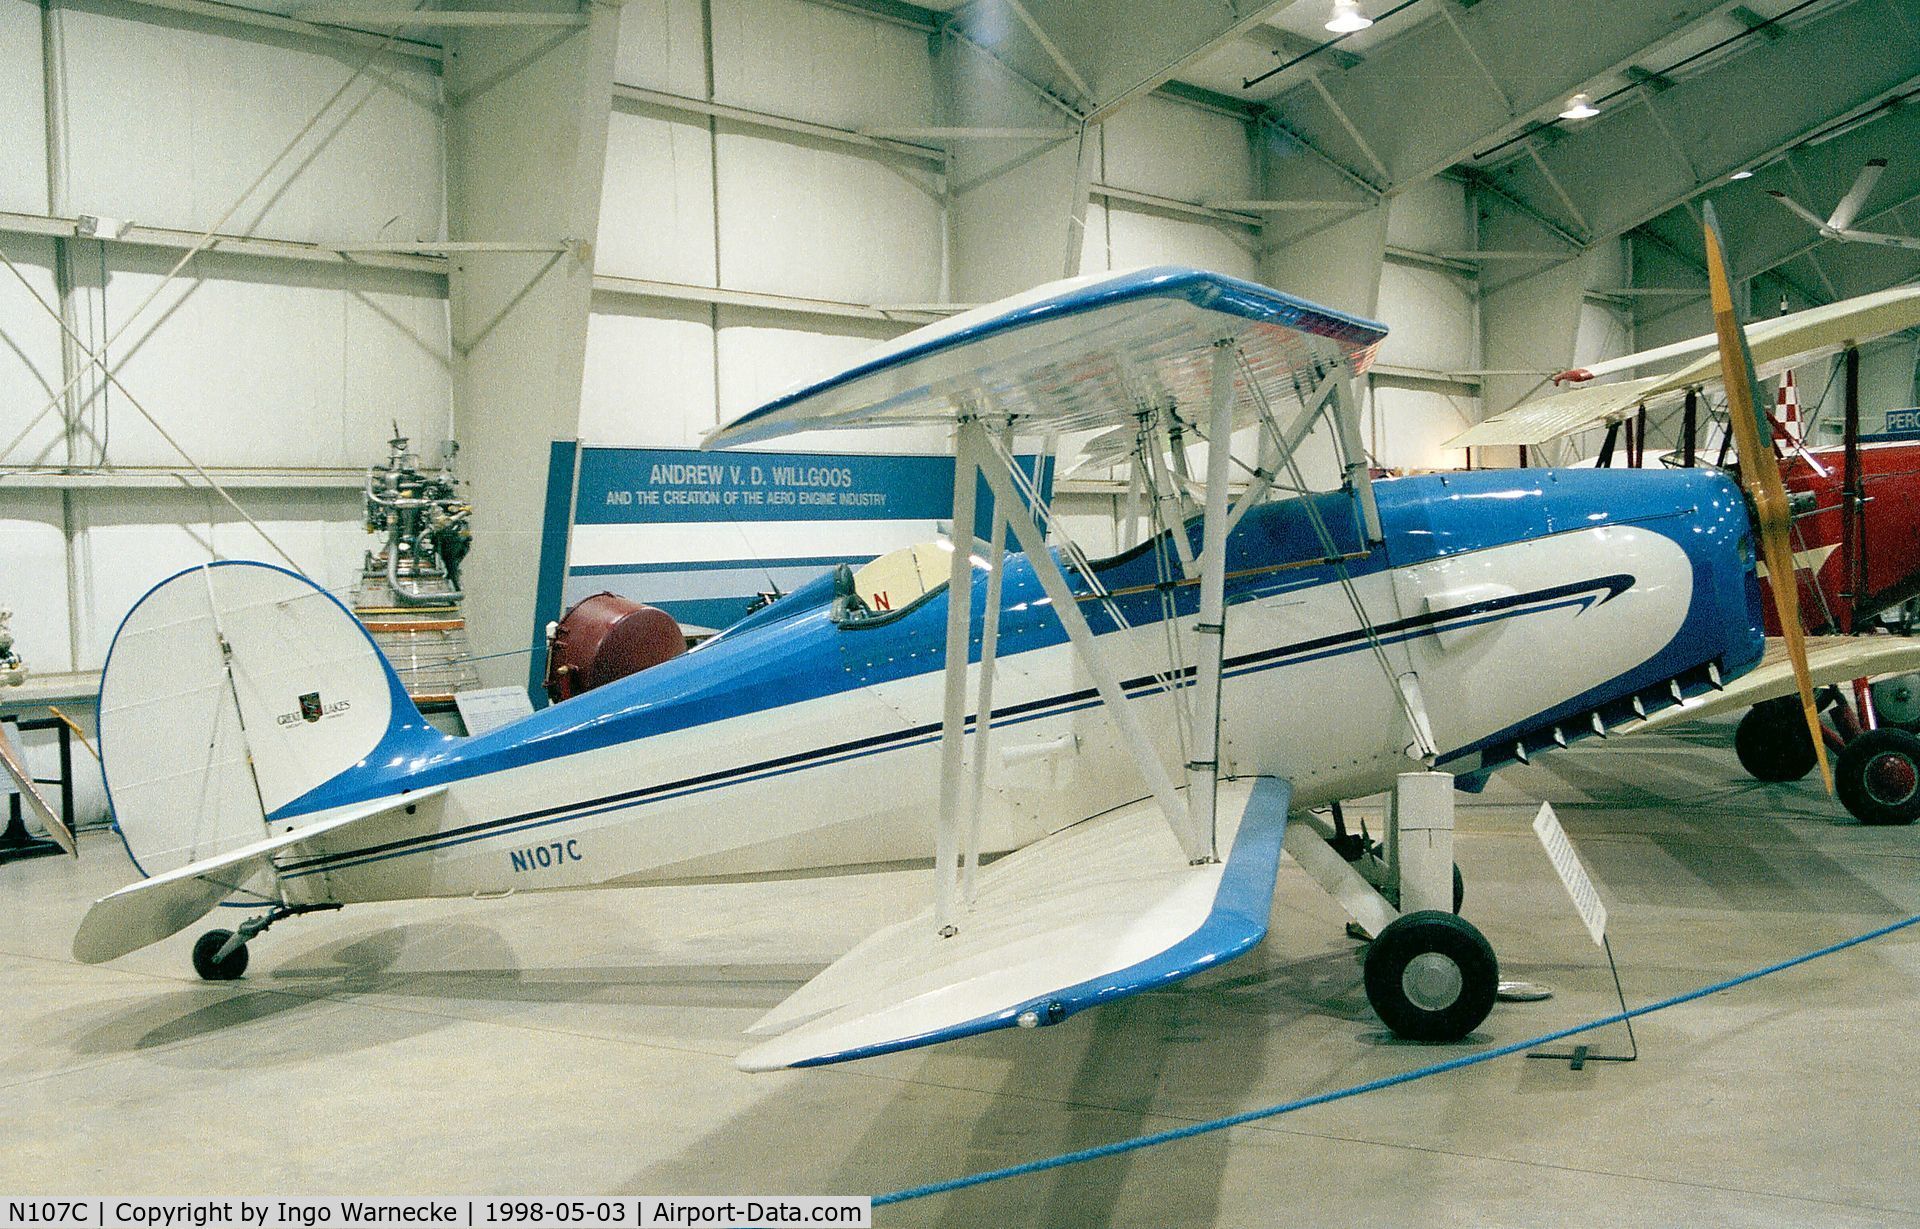 N107C, Great Lakes 2T-1A Sport Trainer C/N 6931K-420, Great Lakes 2T-1A at the New England Air Museum, Windsor Locks CT